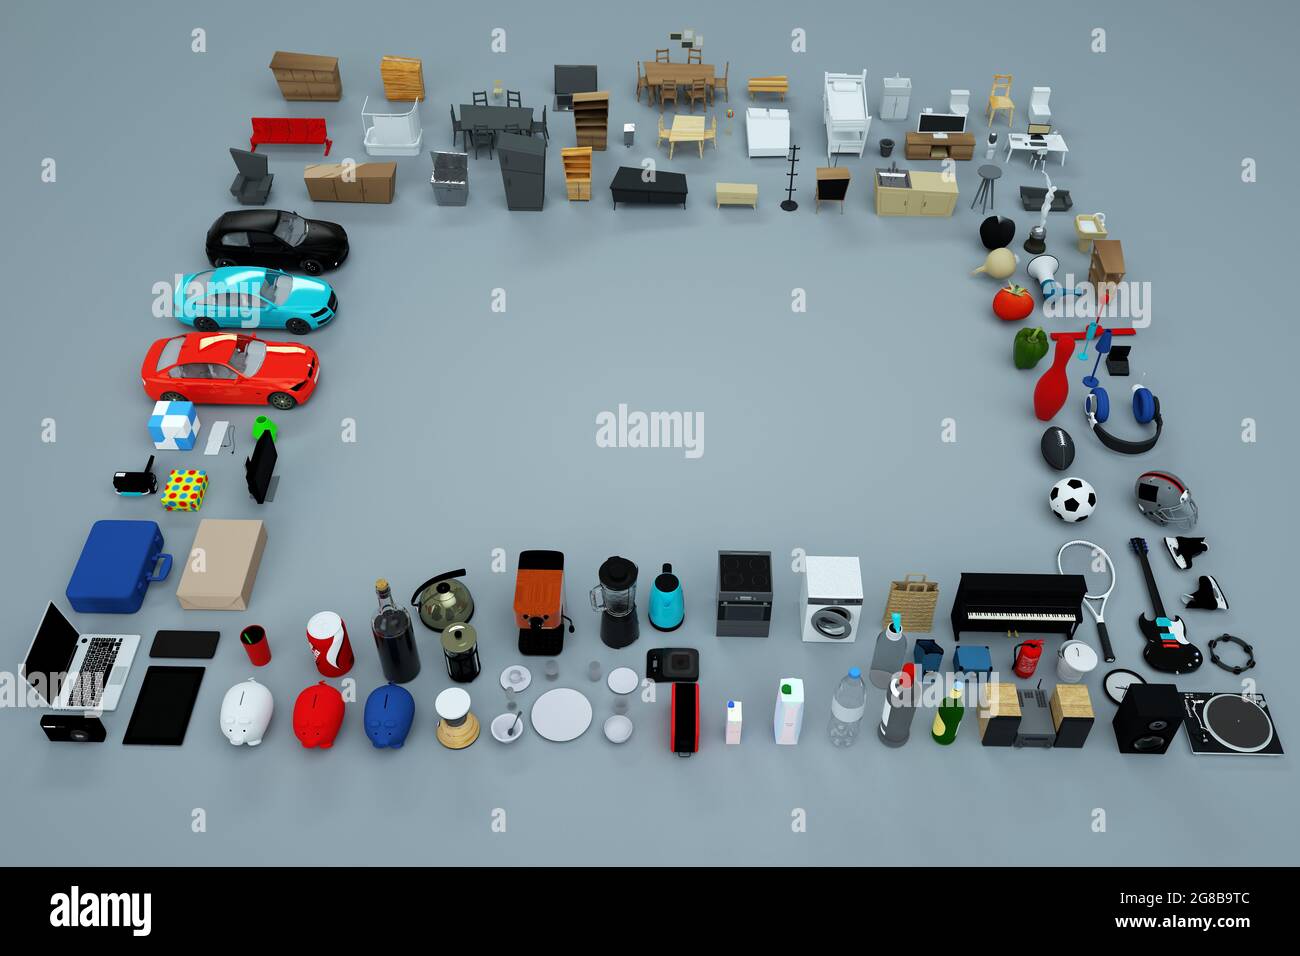 3D graphics, lots of 3D models of home appliances and furniture. Collection of items. Computer graphics. Top view. Isolated objects on a gray backgrou Stock Photo